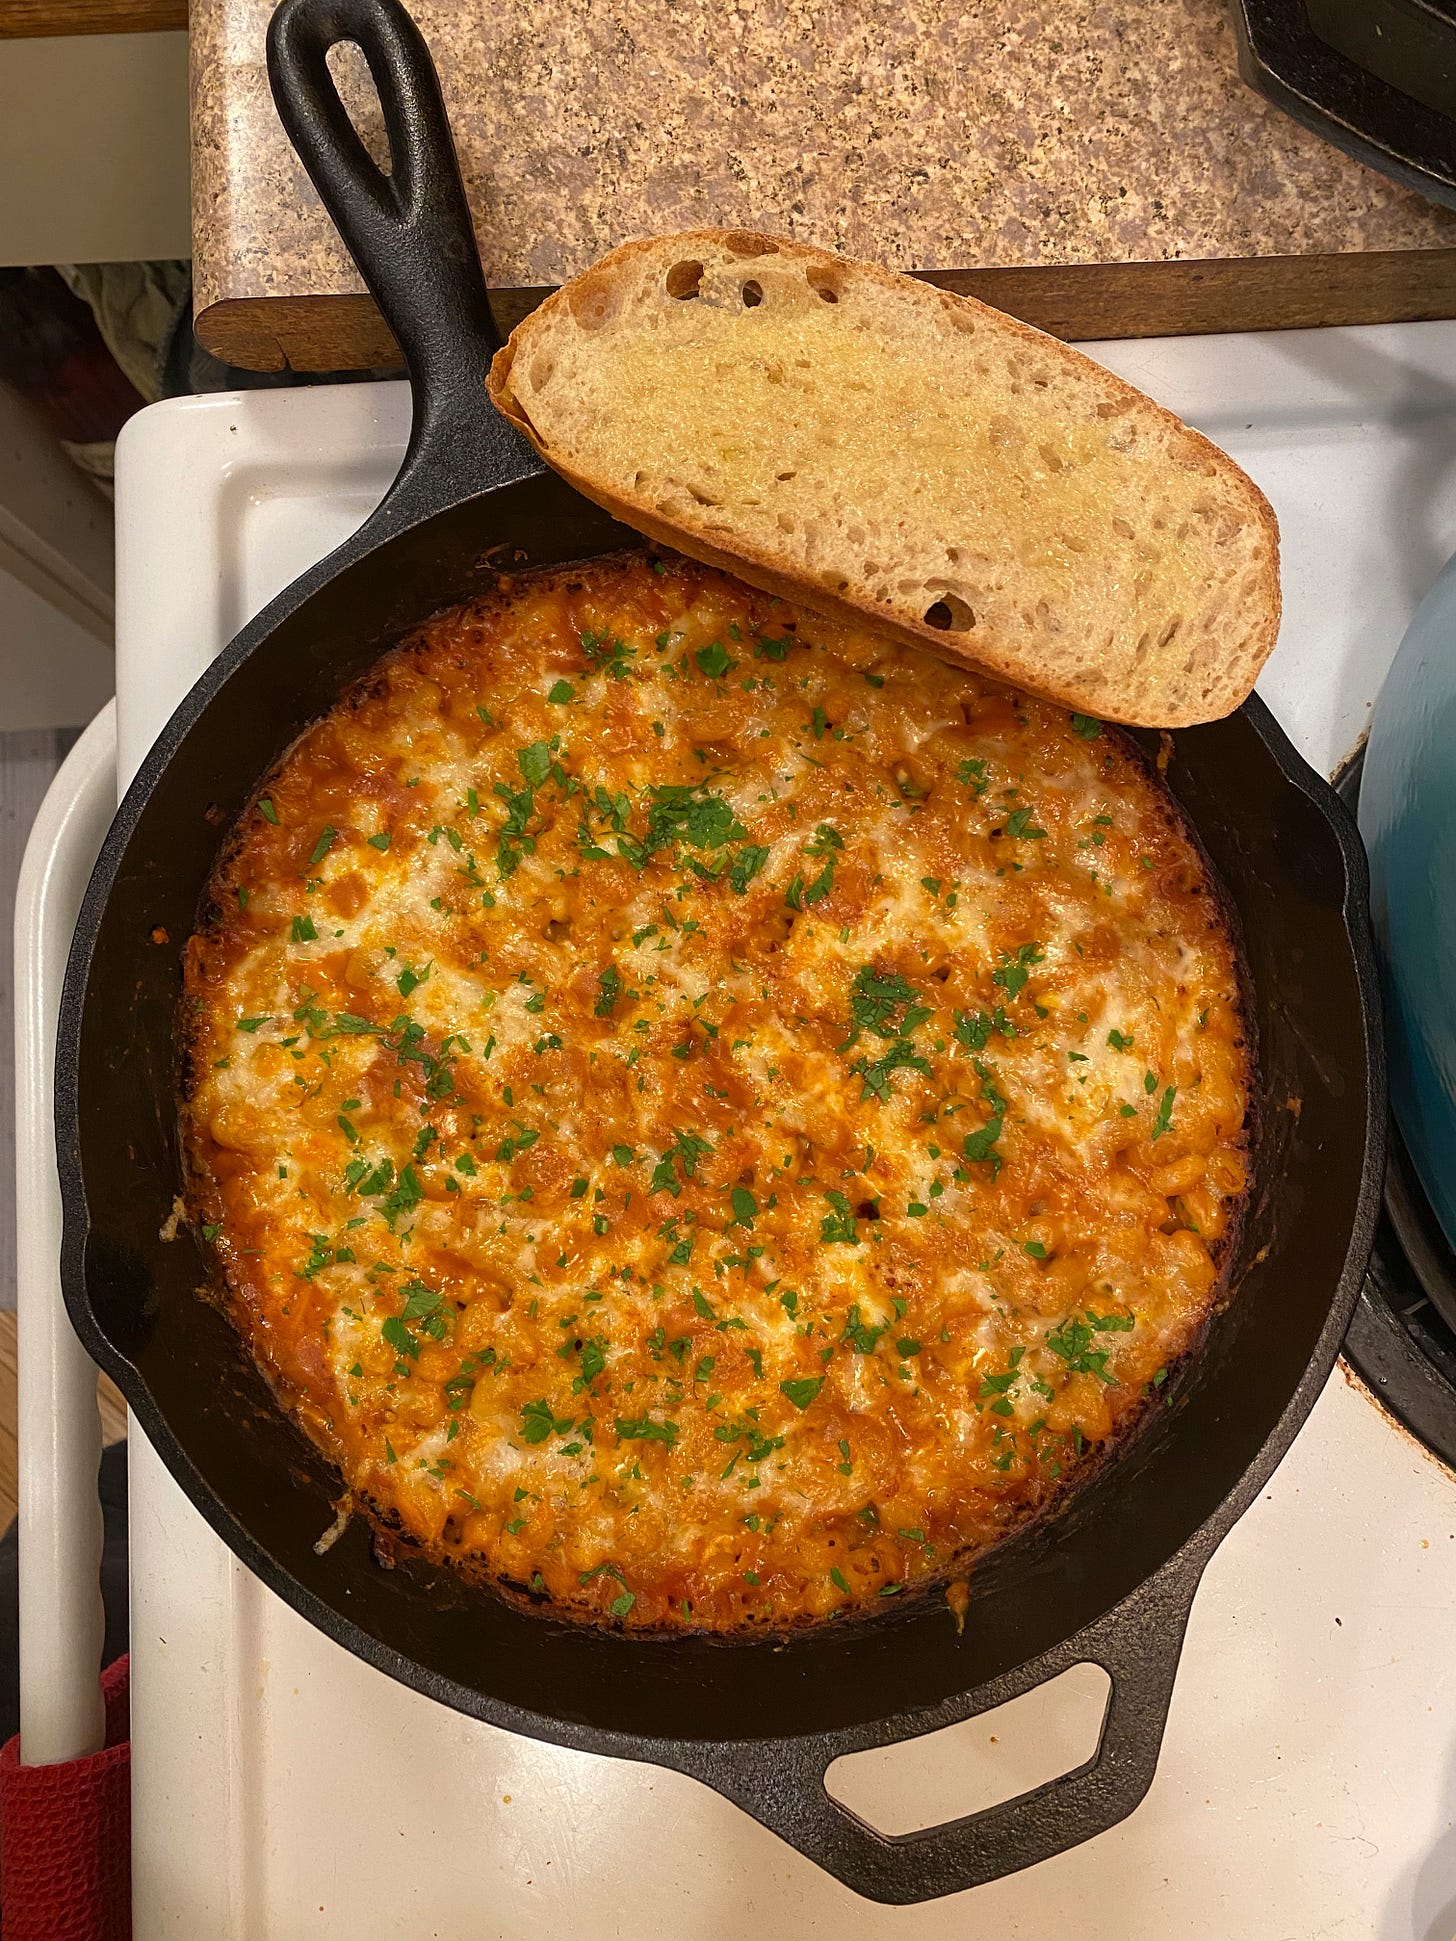 On the stove, from above, a cast iron pan full of cheesy baked beans. The tomato sauce has bubbled up over the cheese at the edges, and the dish is sprinkled with parsley. A slice of sourdough toast rests on the edge of the pan.